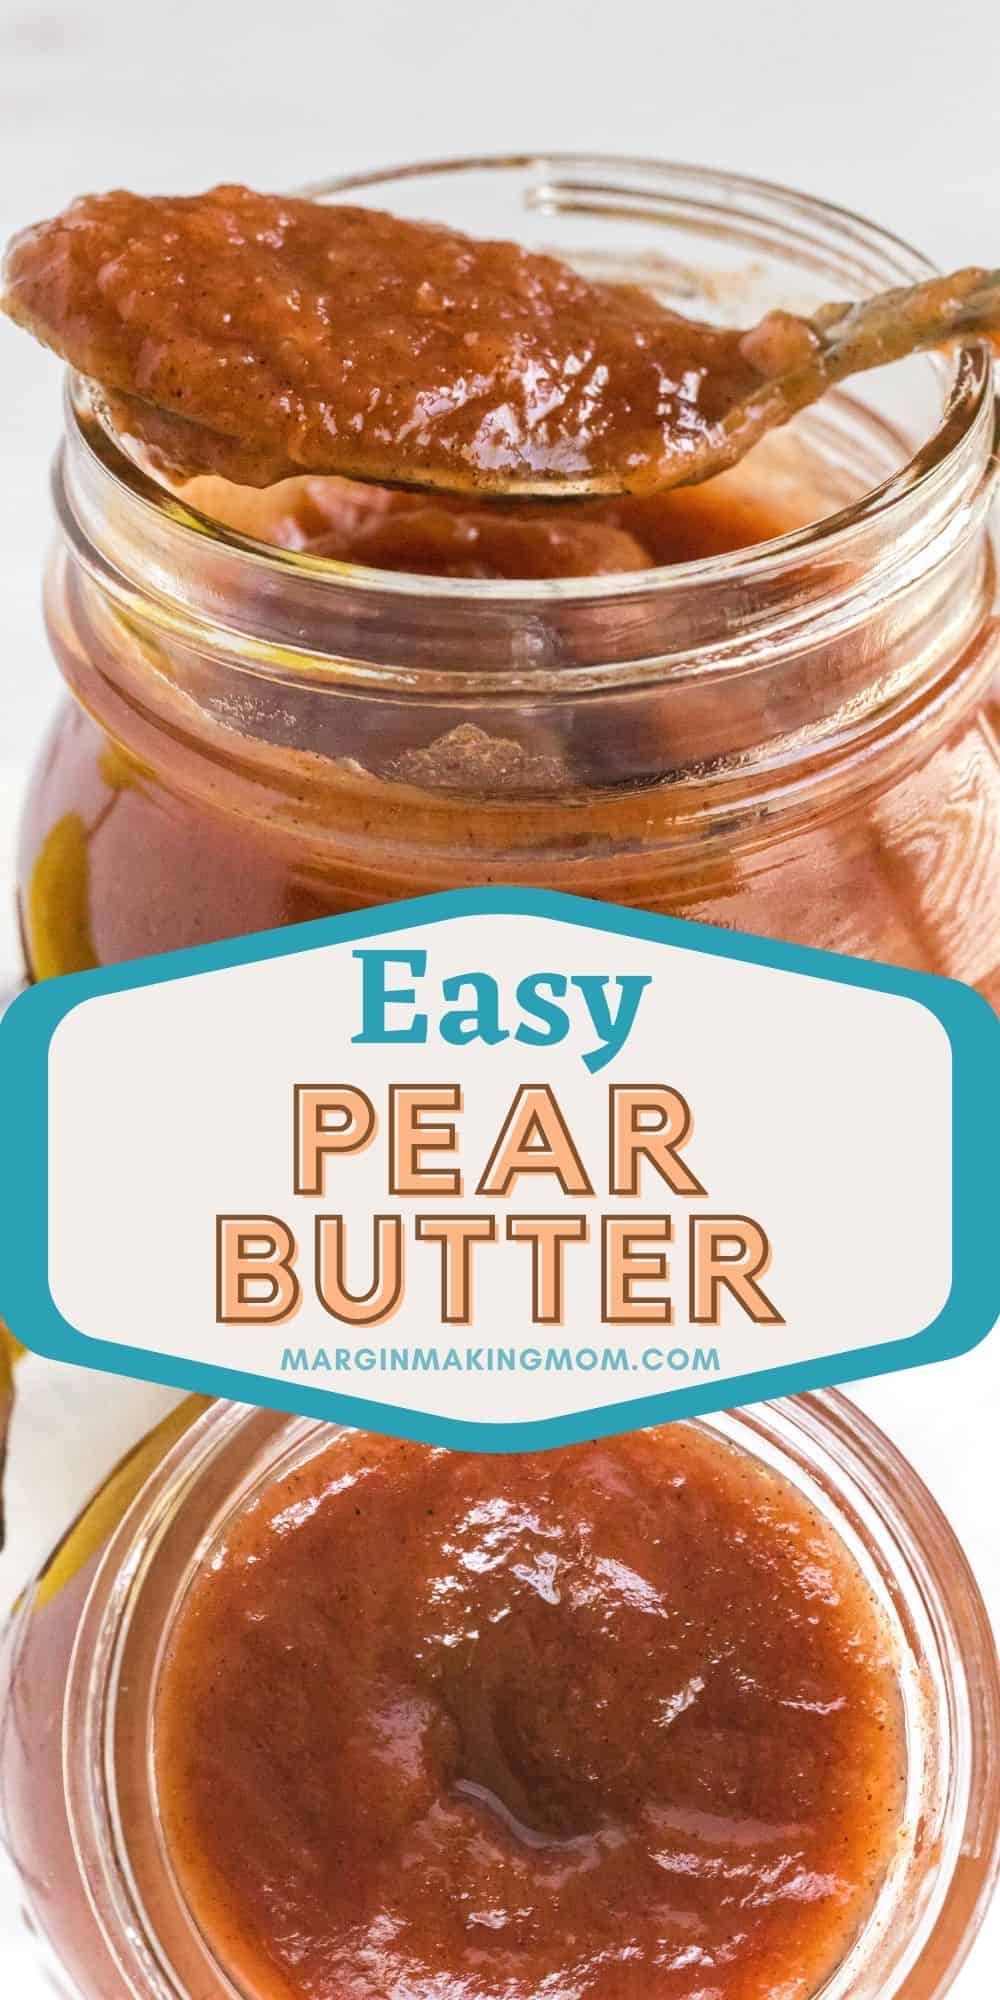 collage image featuring two photos of a jar of pear butter. One photo has a jar with a spoon scooping out some pear butter, the other photo is an overhead view of the mouth of the jar